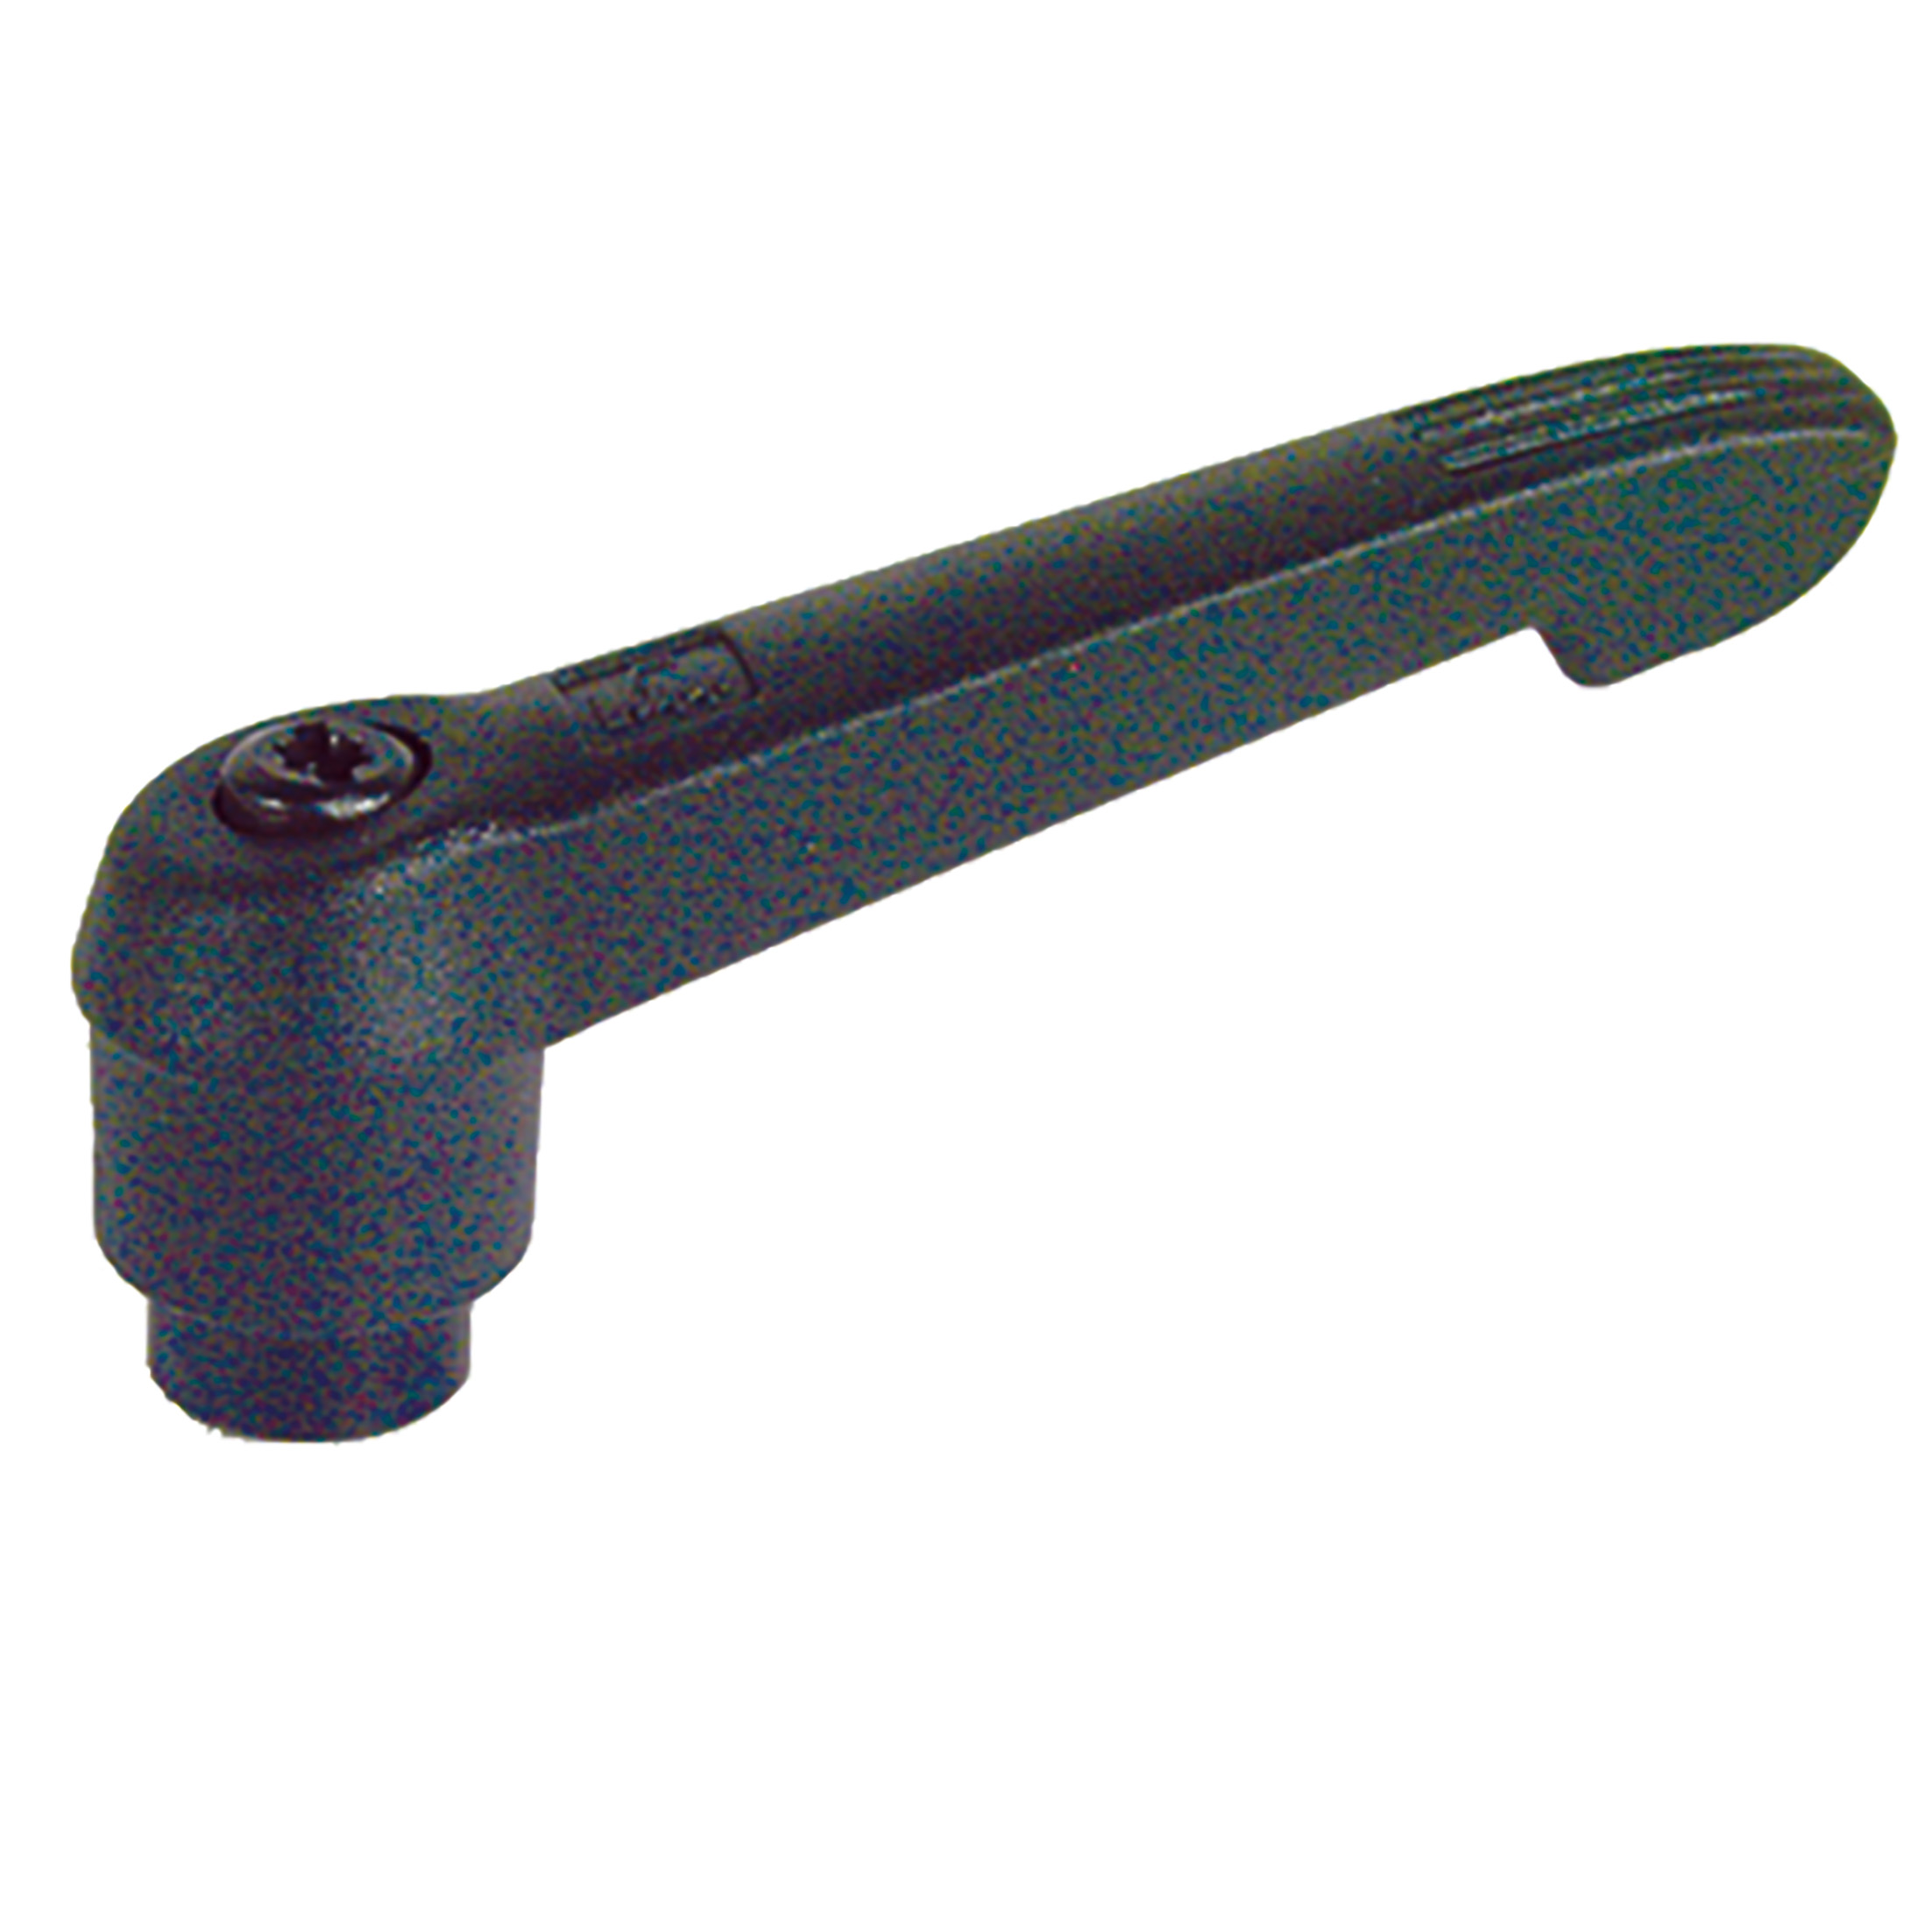 Technopolymer clamping lever - female - Plastic - Steel quality class 5.8 - 